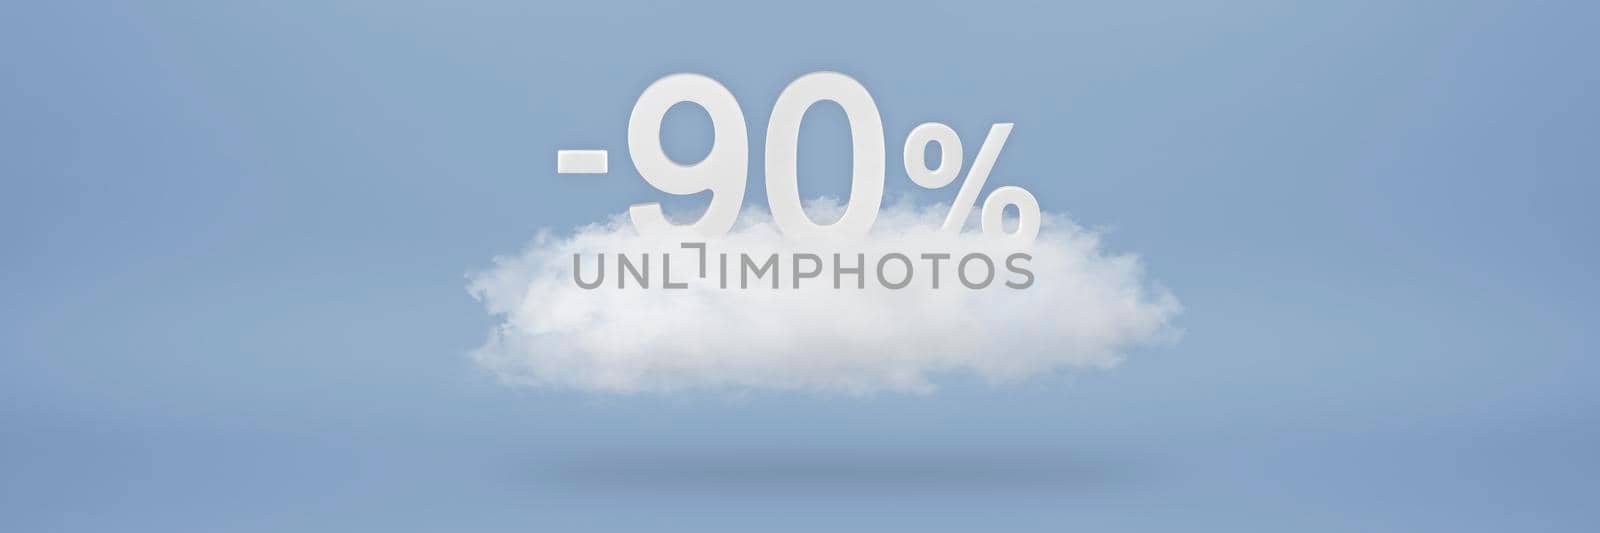 Discount 90 percent. Big discounts, sale up to ninety percent. 3D numbers float on a cloud on a blue background. Copy space. Advertising banner and poster to be inserted into the project.